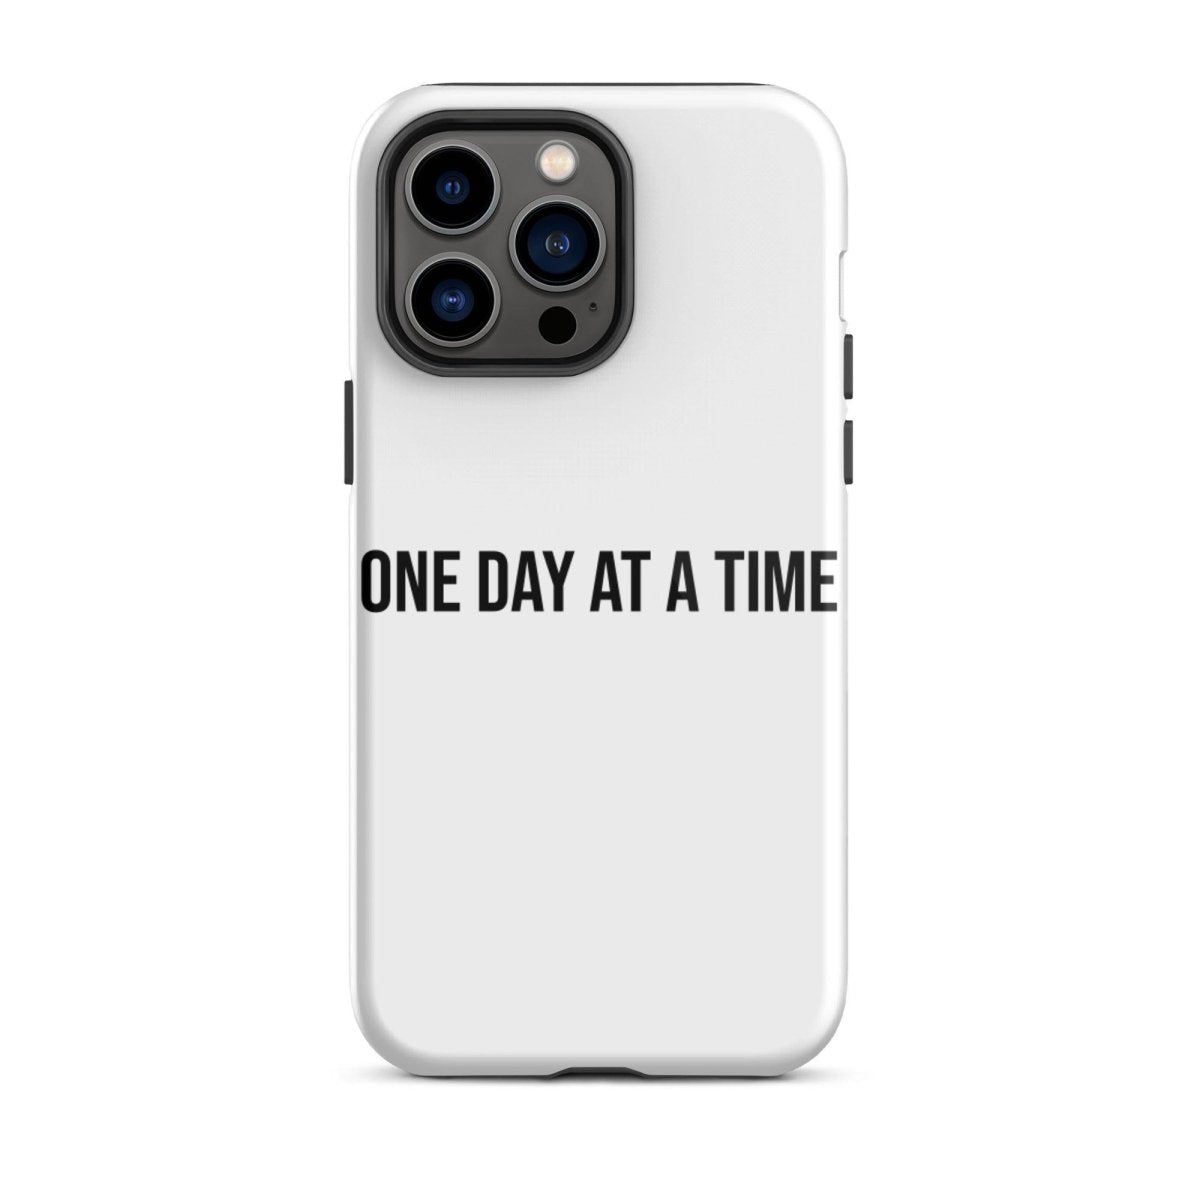 Tough iPhone case "One day at a time" - Clean & Sober